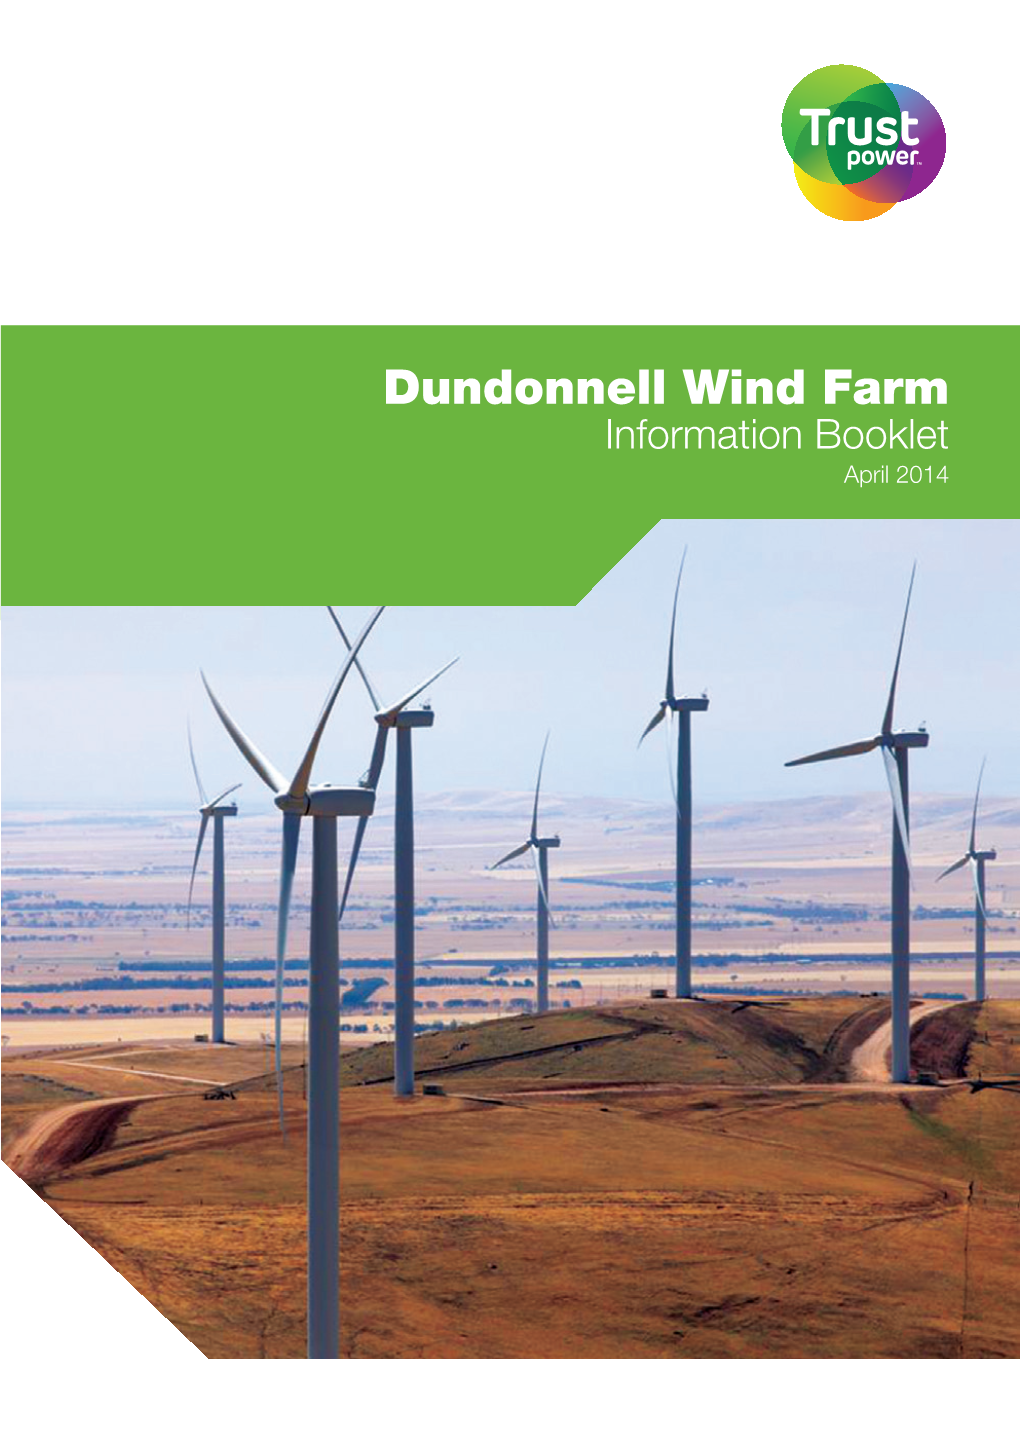 Dundonnell Wind Farm Information Booklet April 2014 Introduction